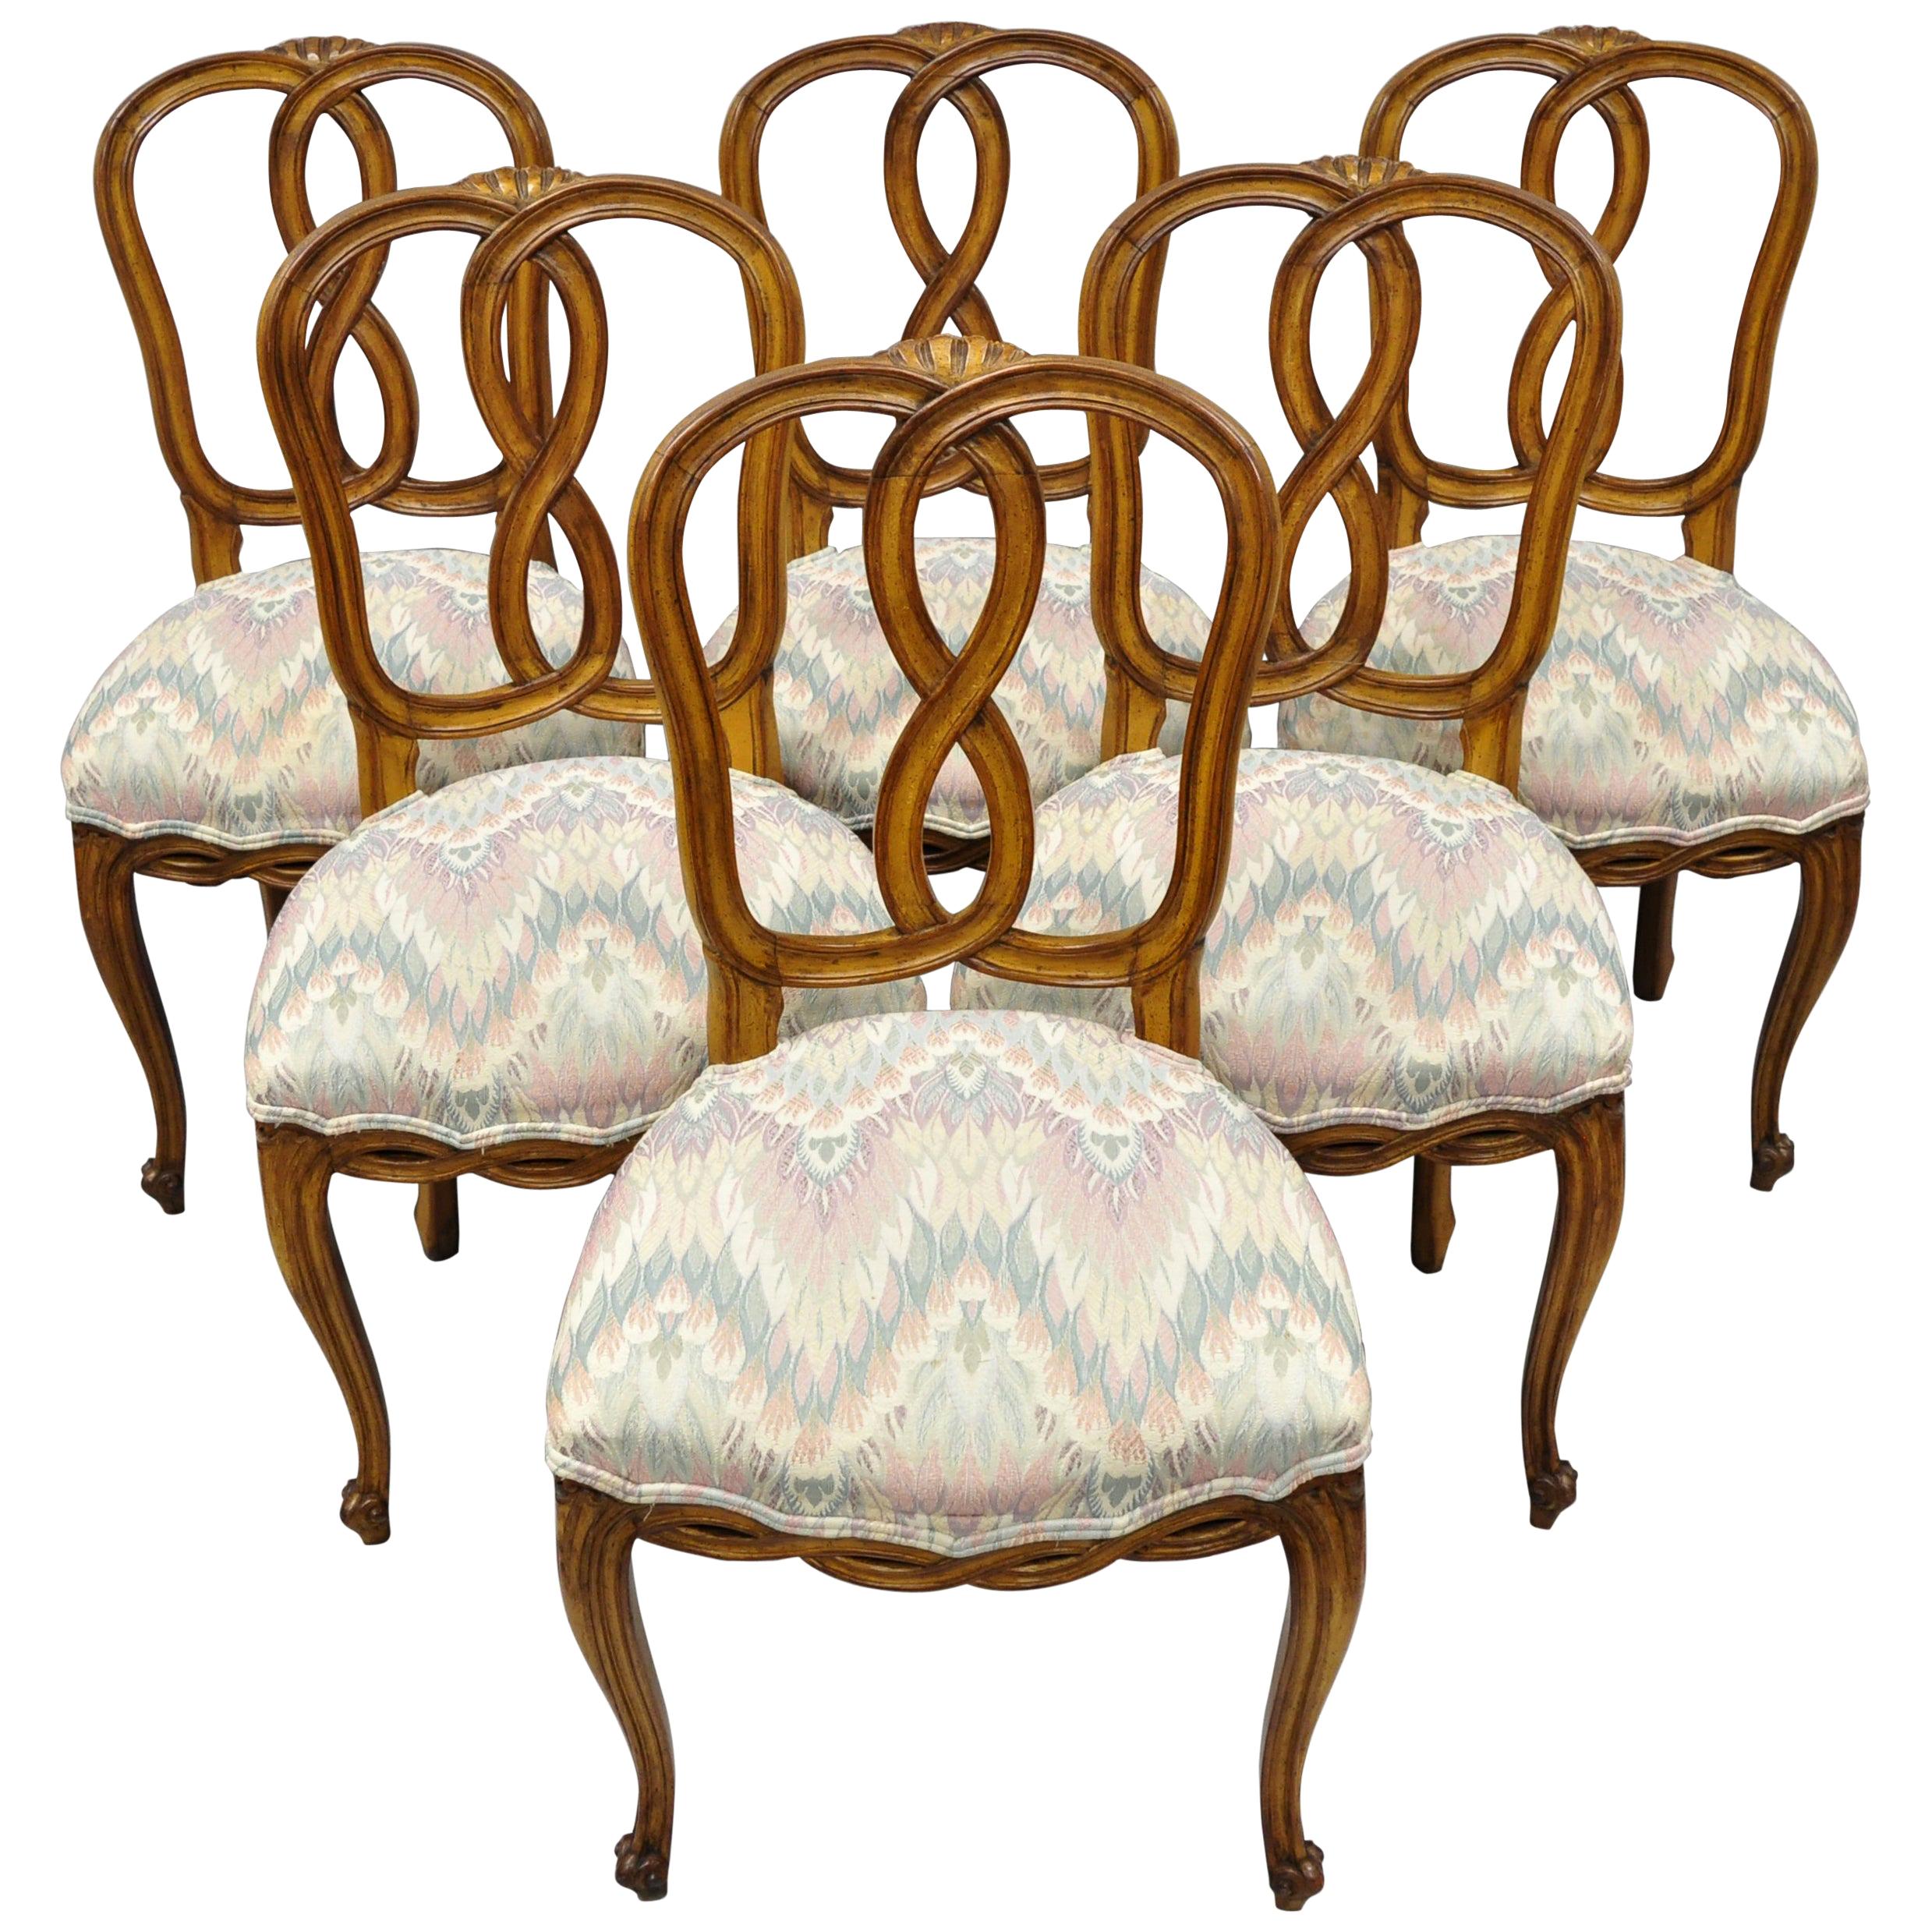 Set of 6 French Provincial Style Pretzel Back Spiral Carved Dining Chairs